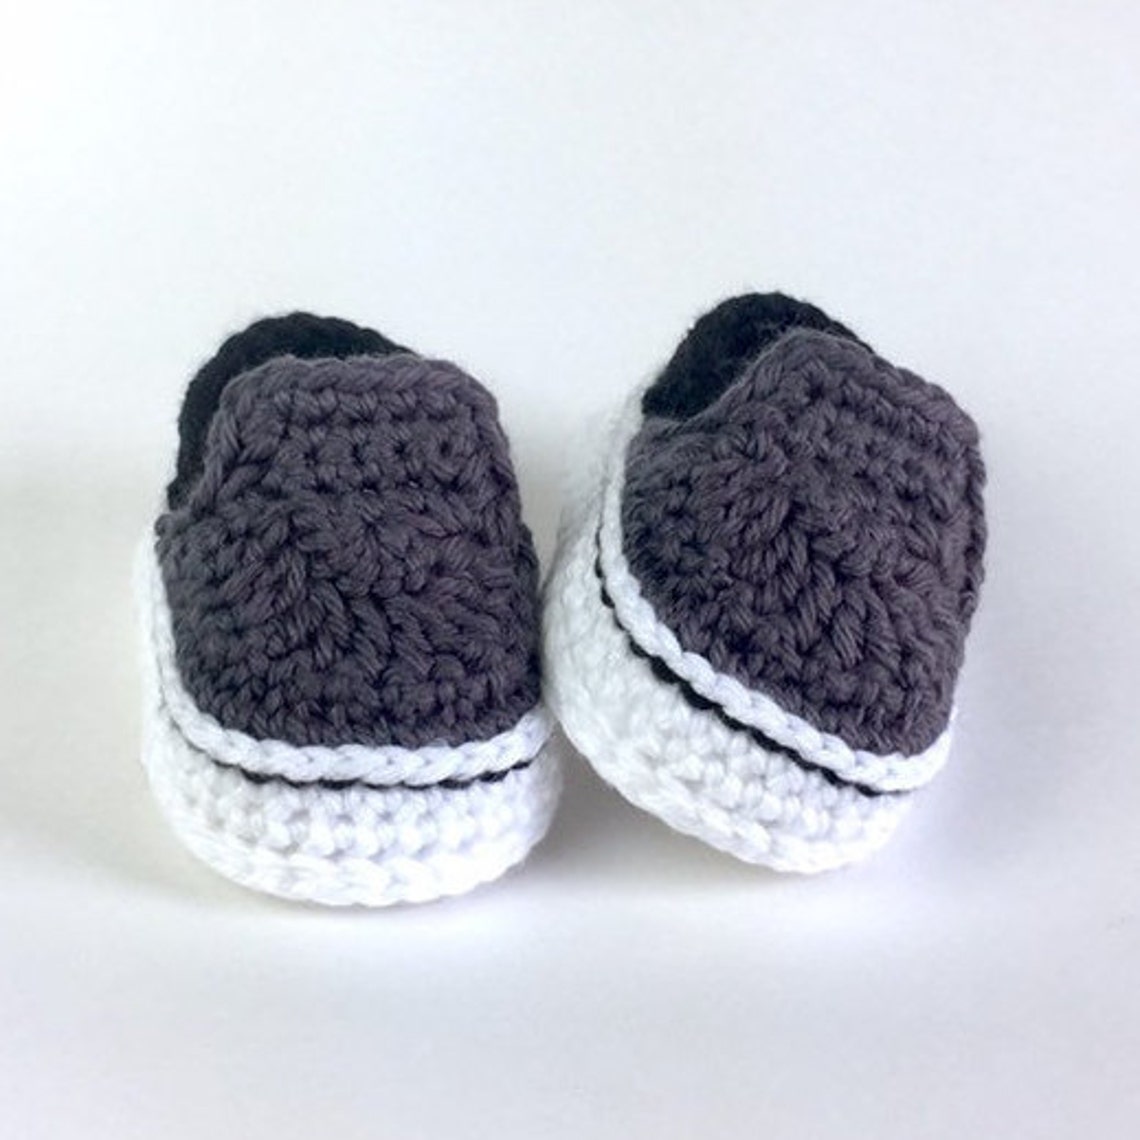 Crochet Baby Sneakers Crochet Baby Shoes Crib Shoes - Etsy